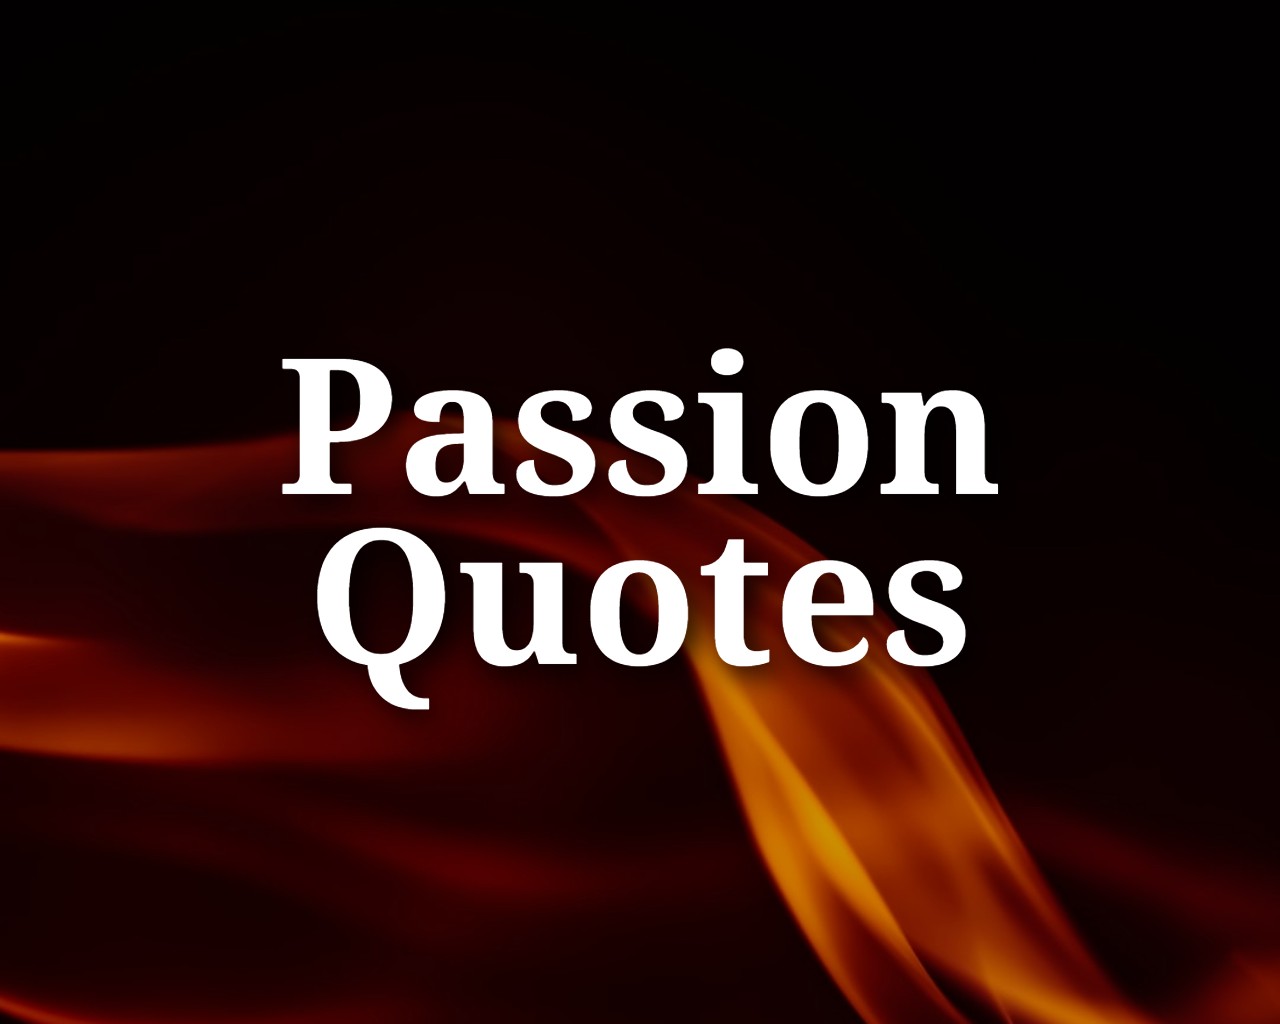 87 Passion Quotes That Will Inspire You To Follow Your Passion The Inspiring Journal